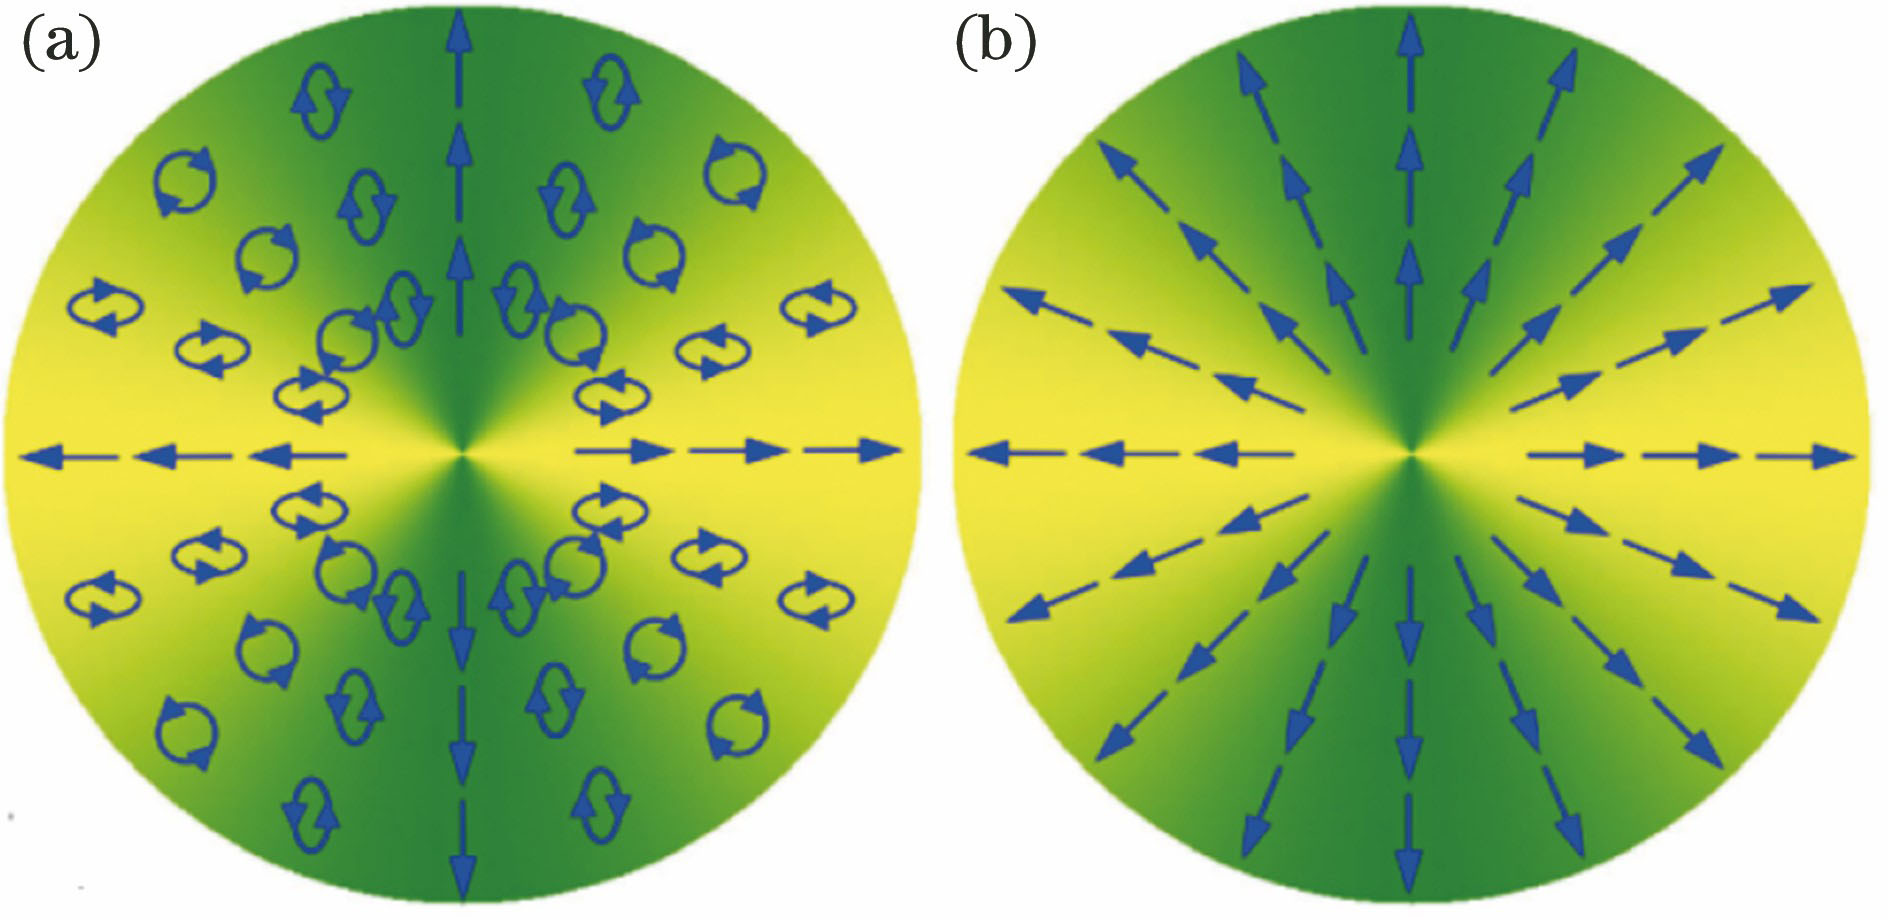 Comparison of hybridly polarized and radially polarized vector optical fields[30]. (a) Hybridly polarized vector optical field; (b) radially polarized vector optical field